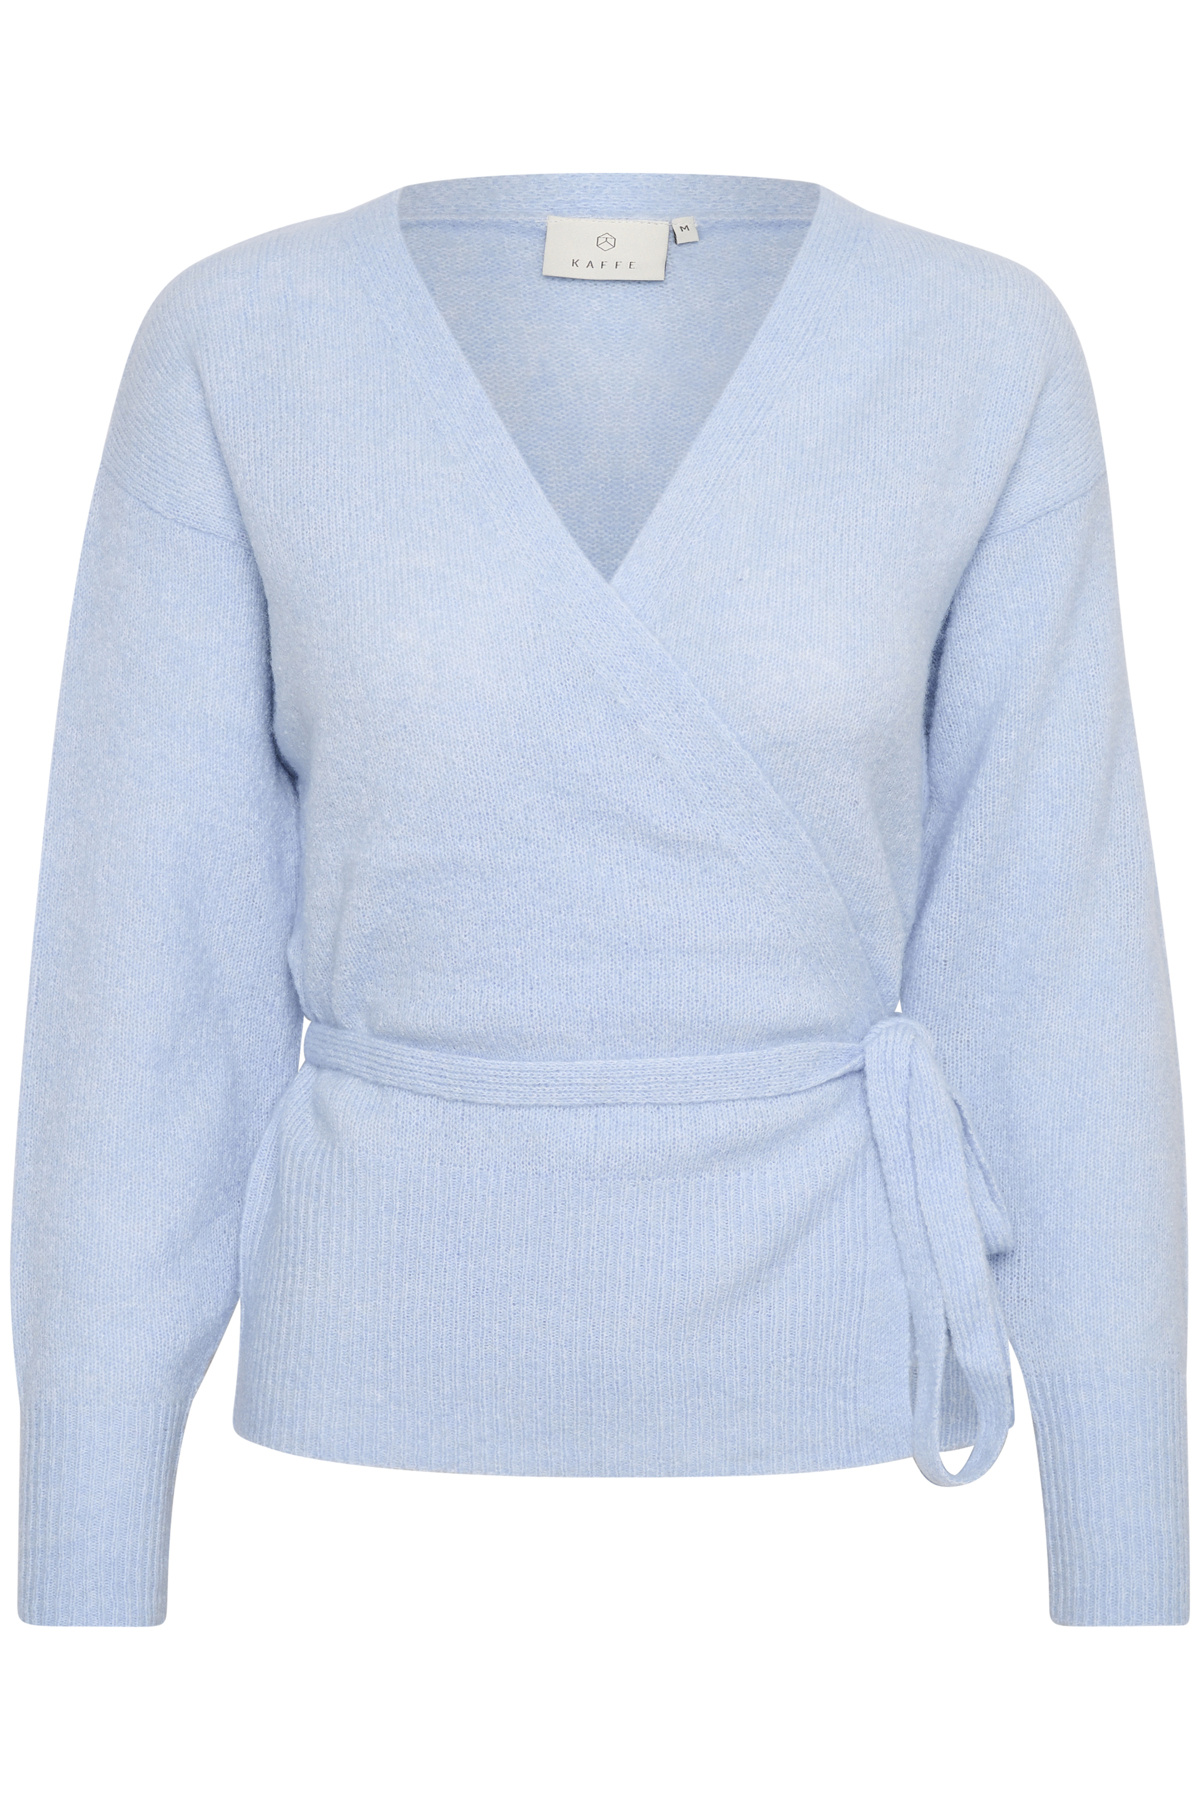 Wendy Wrap Cardigan - Subdued Blues